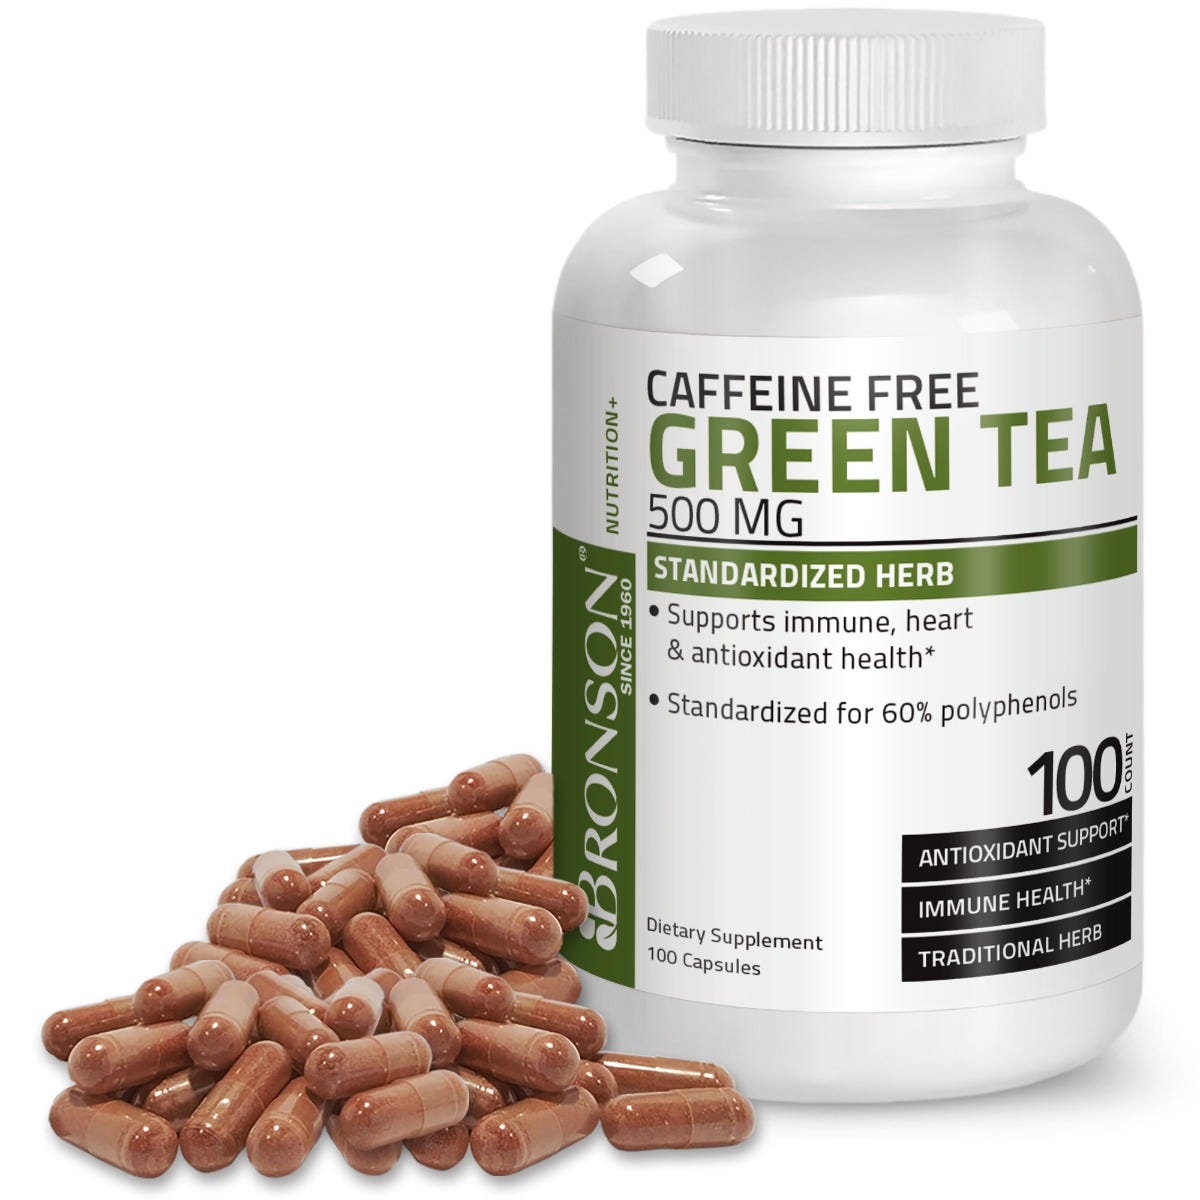 Caffeine Free Green Tea Extract - 500 mg - 100 Capsules view 2 of 5